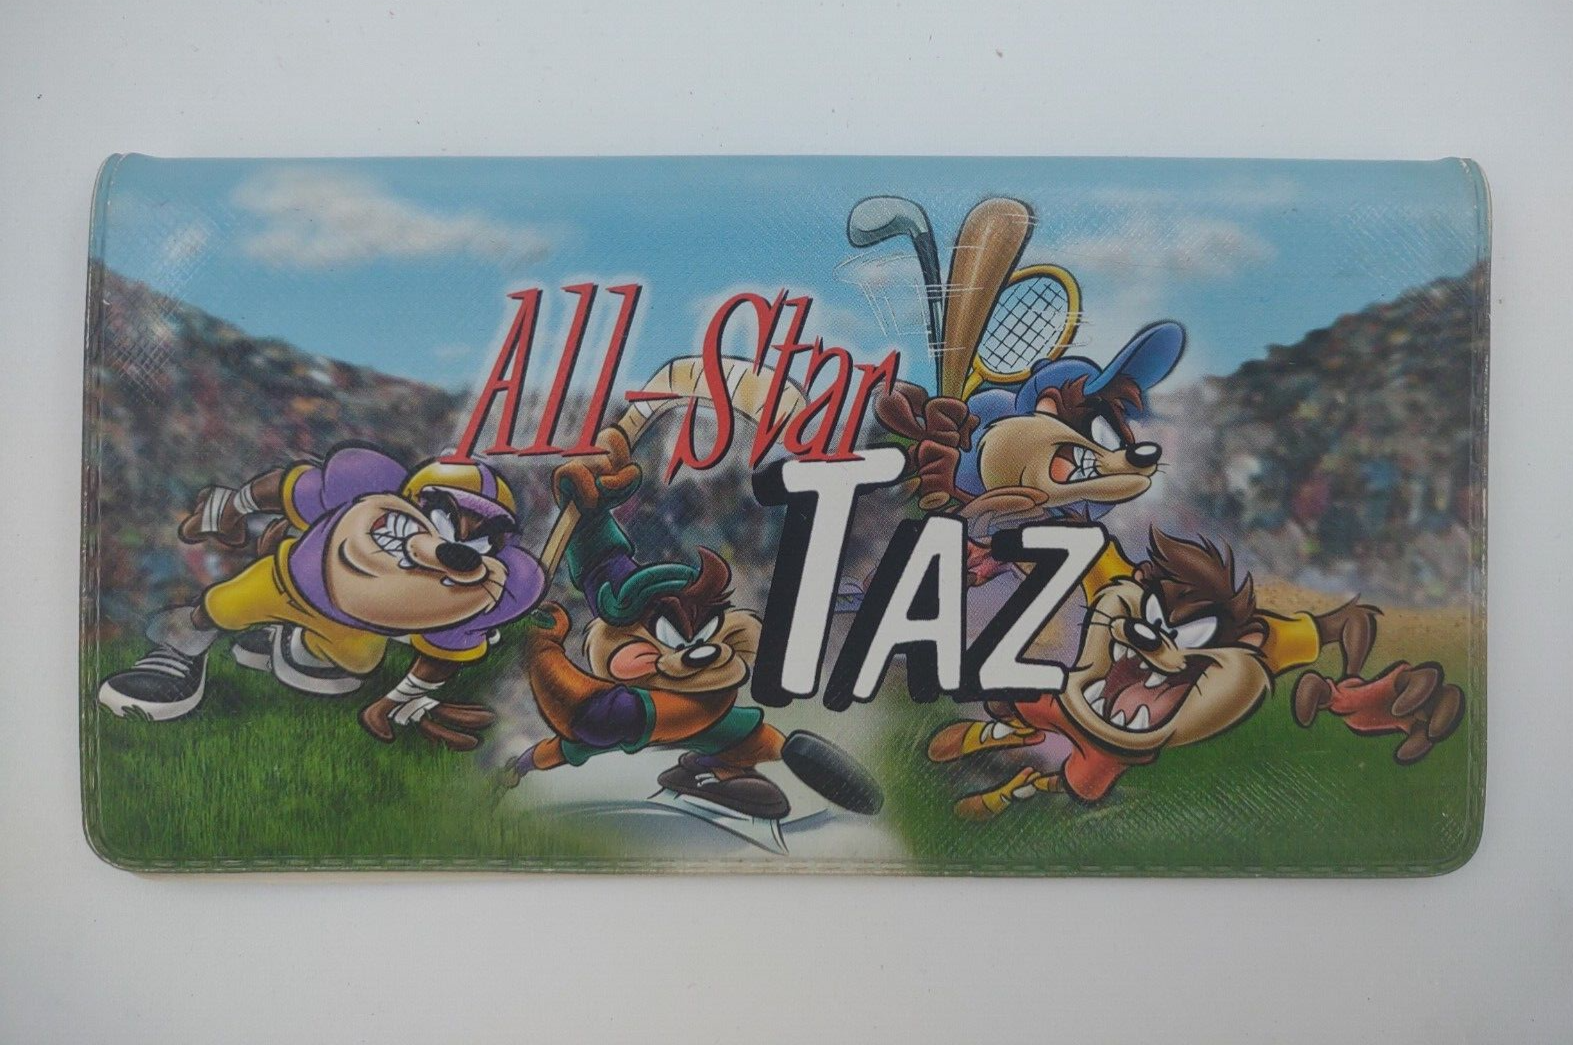 Vintage Looney Tunes All Star Taz Check Book Cover TM 2000 Warner Bross - $13.42